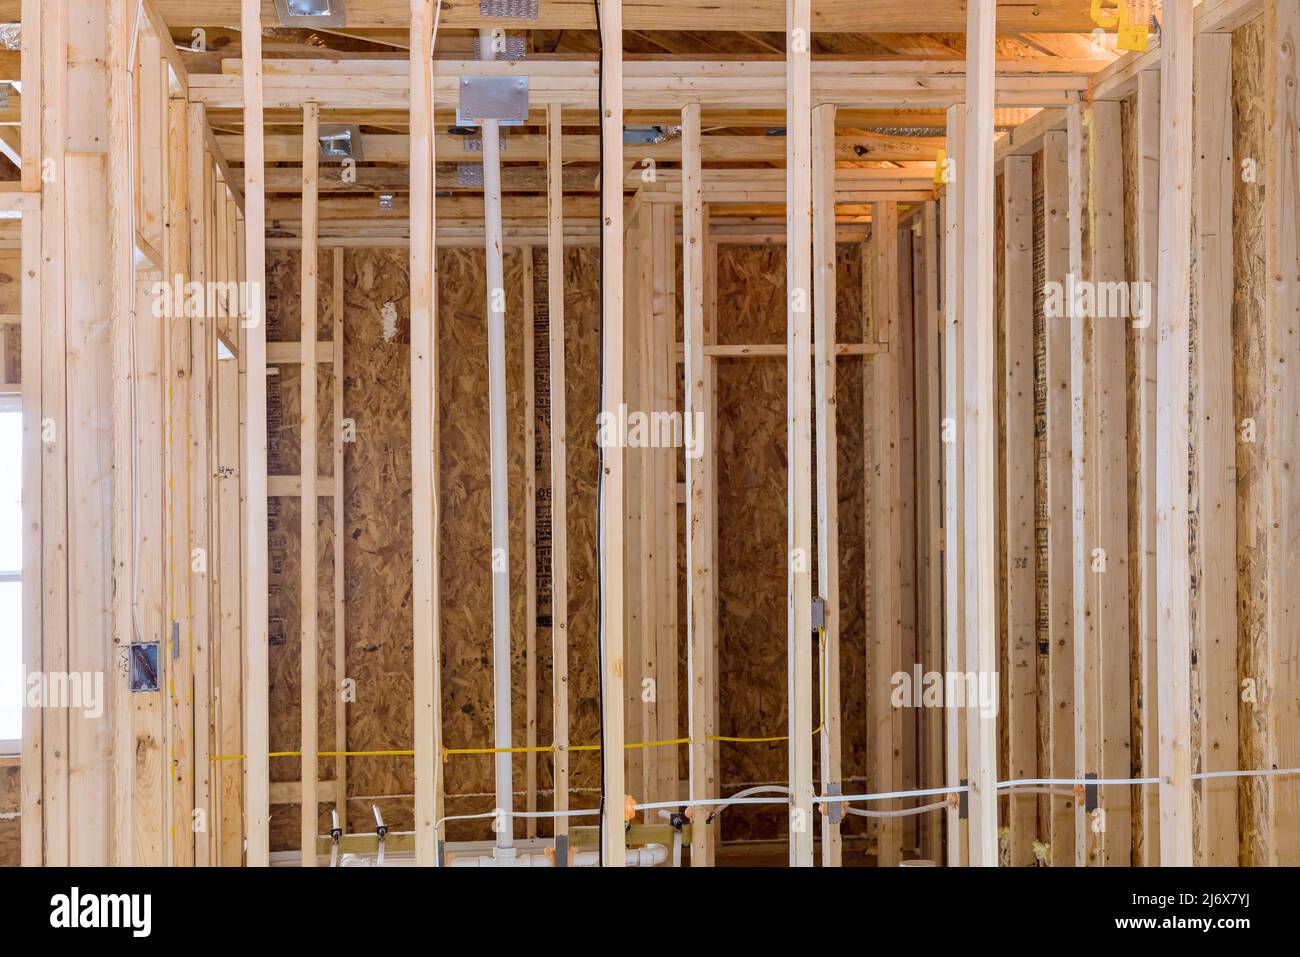 Building construction wood framing of a new house under construction Stock Photo